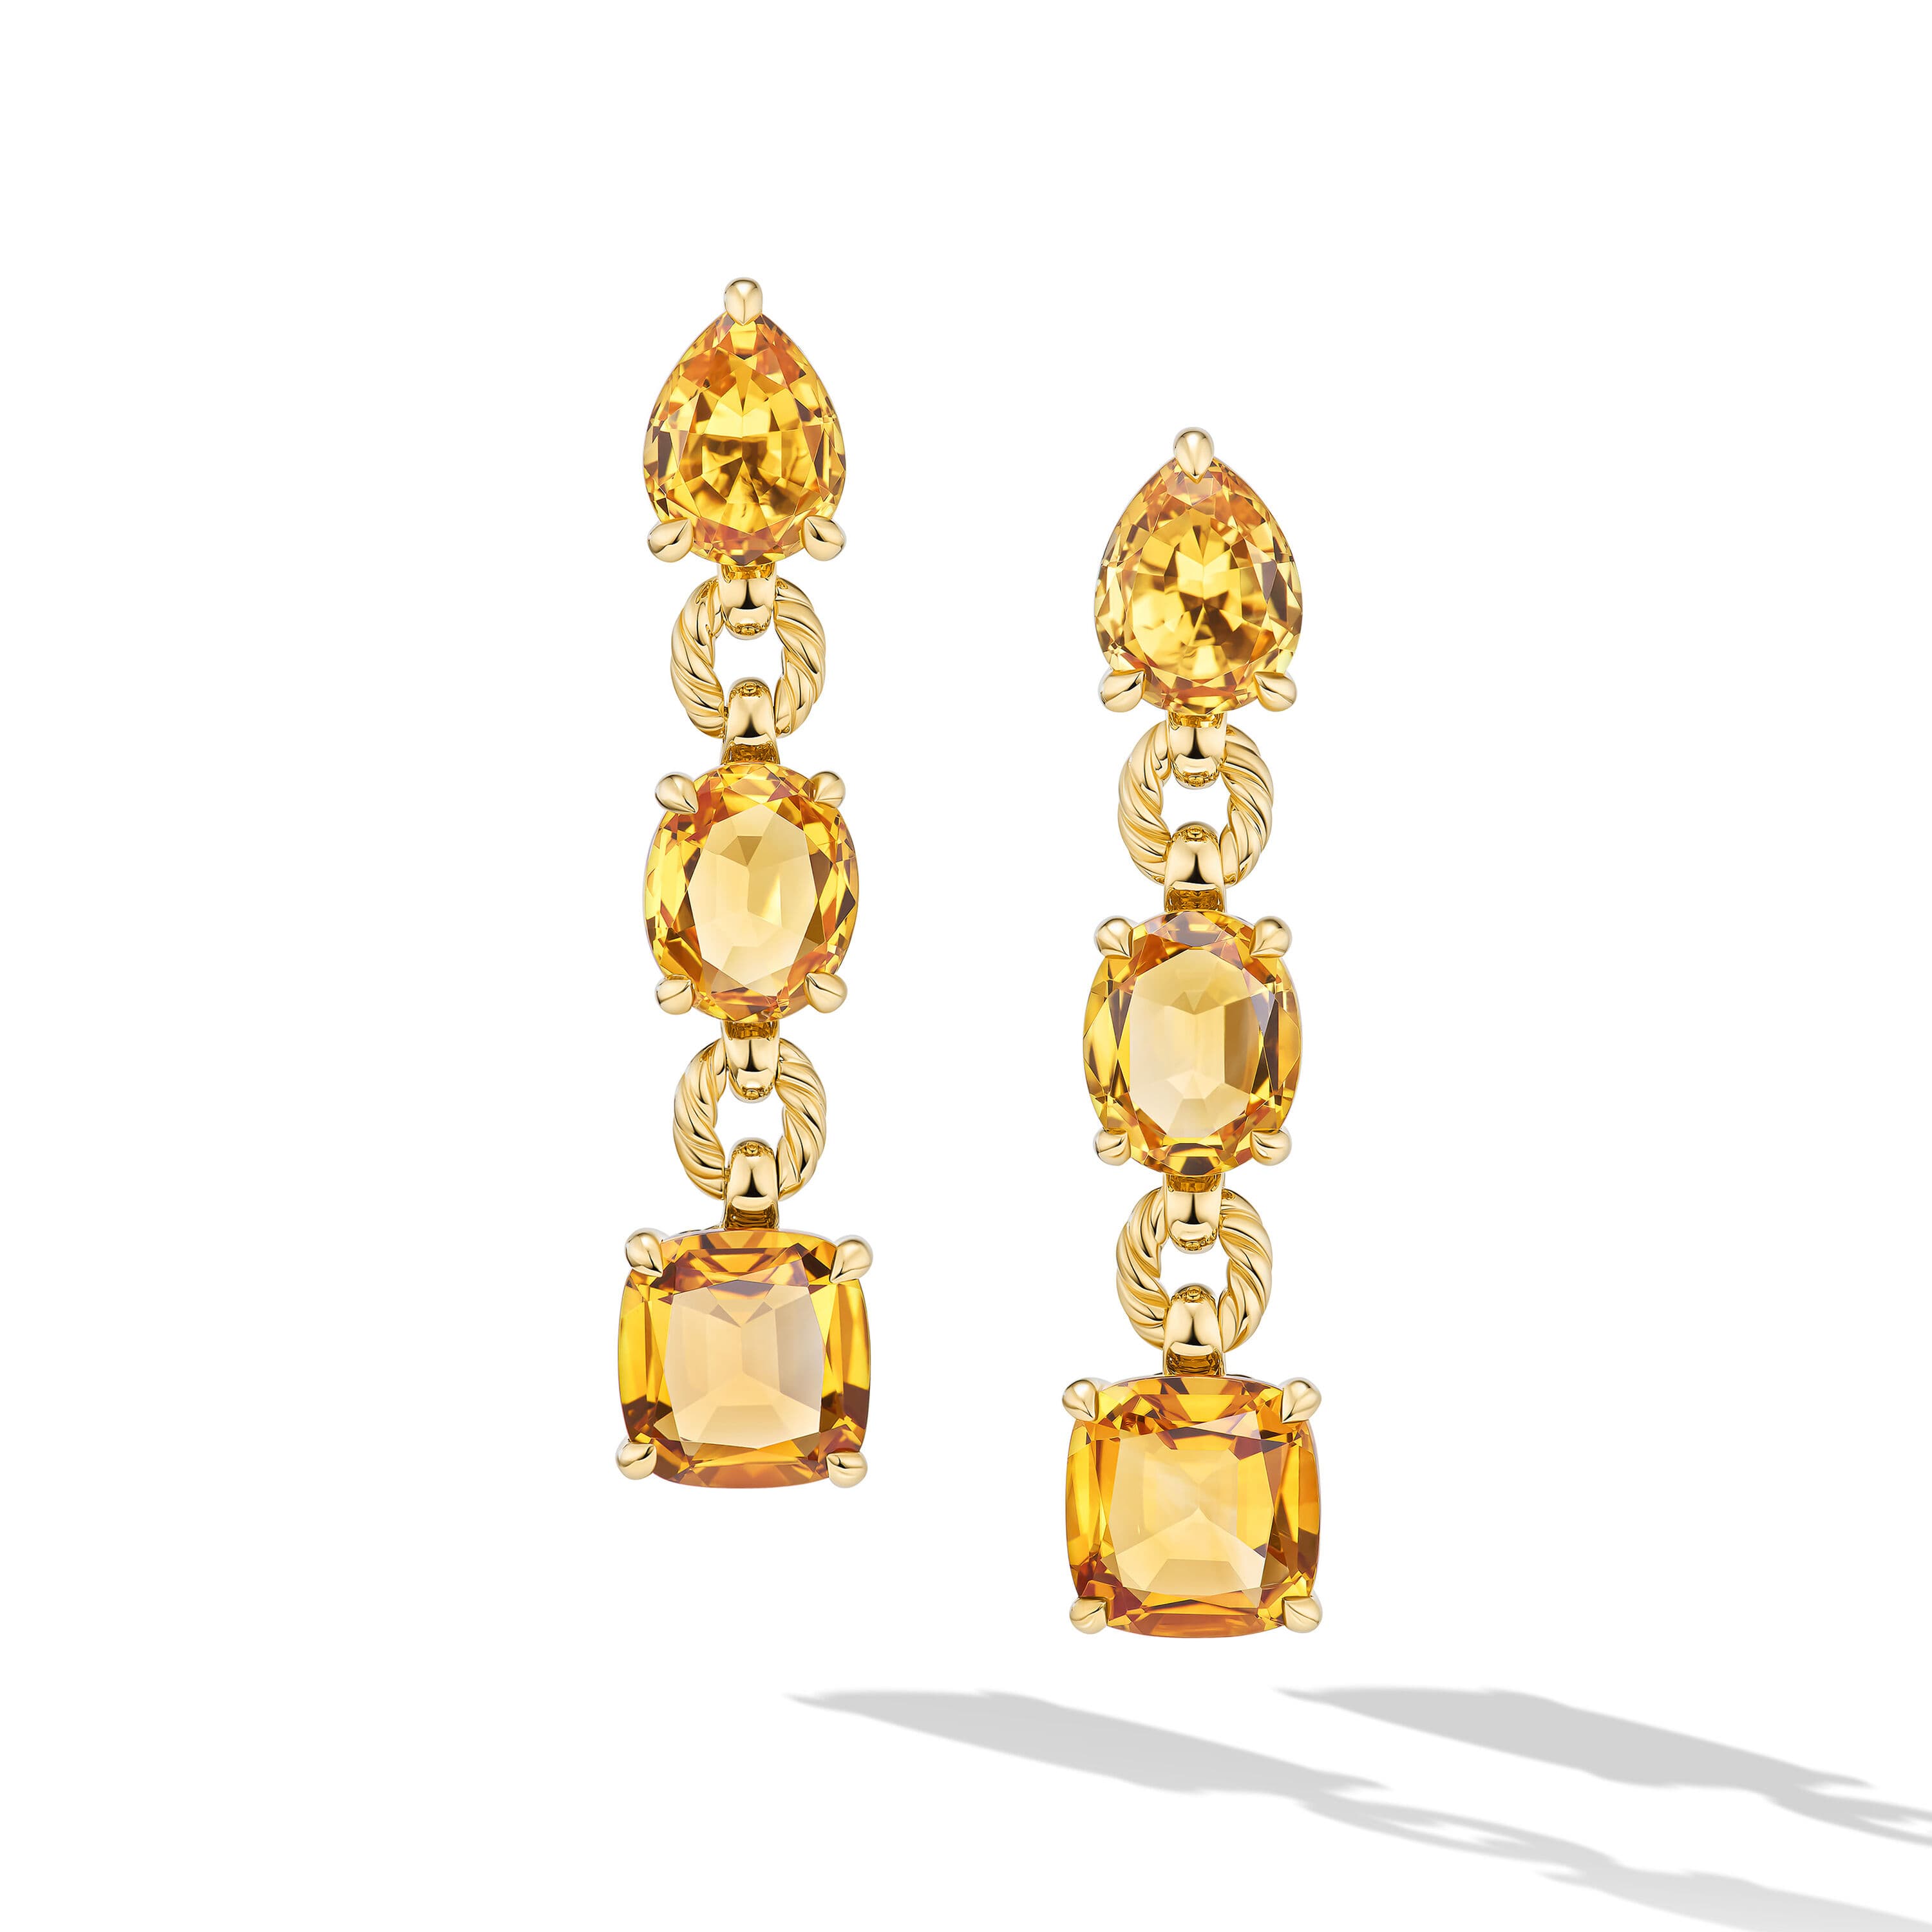 David Yurman Marbella Drop Earrings in 18K Yellow Gold with Citrine and Madeira Citrine 0